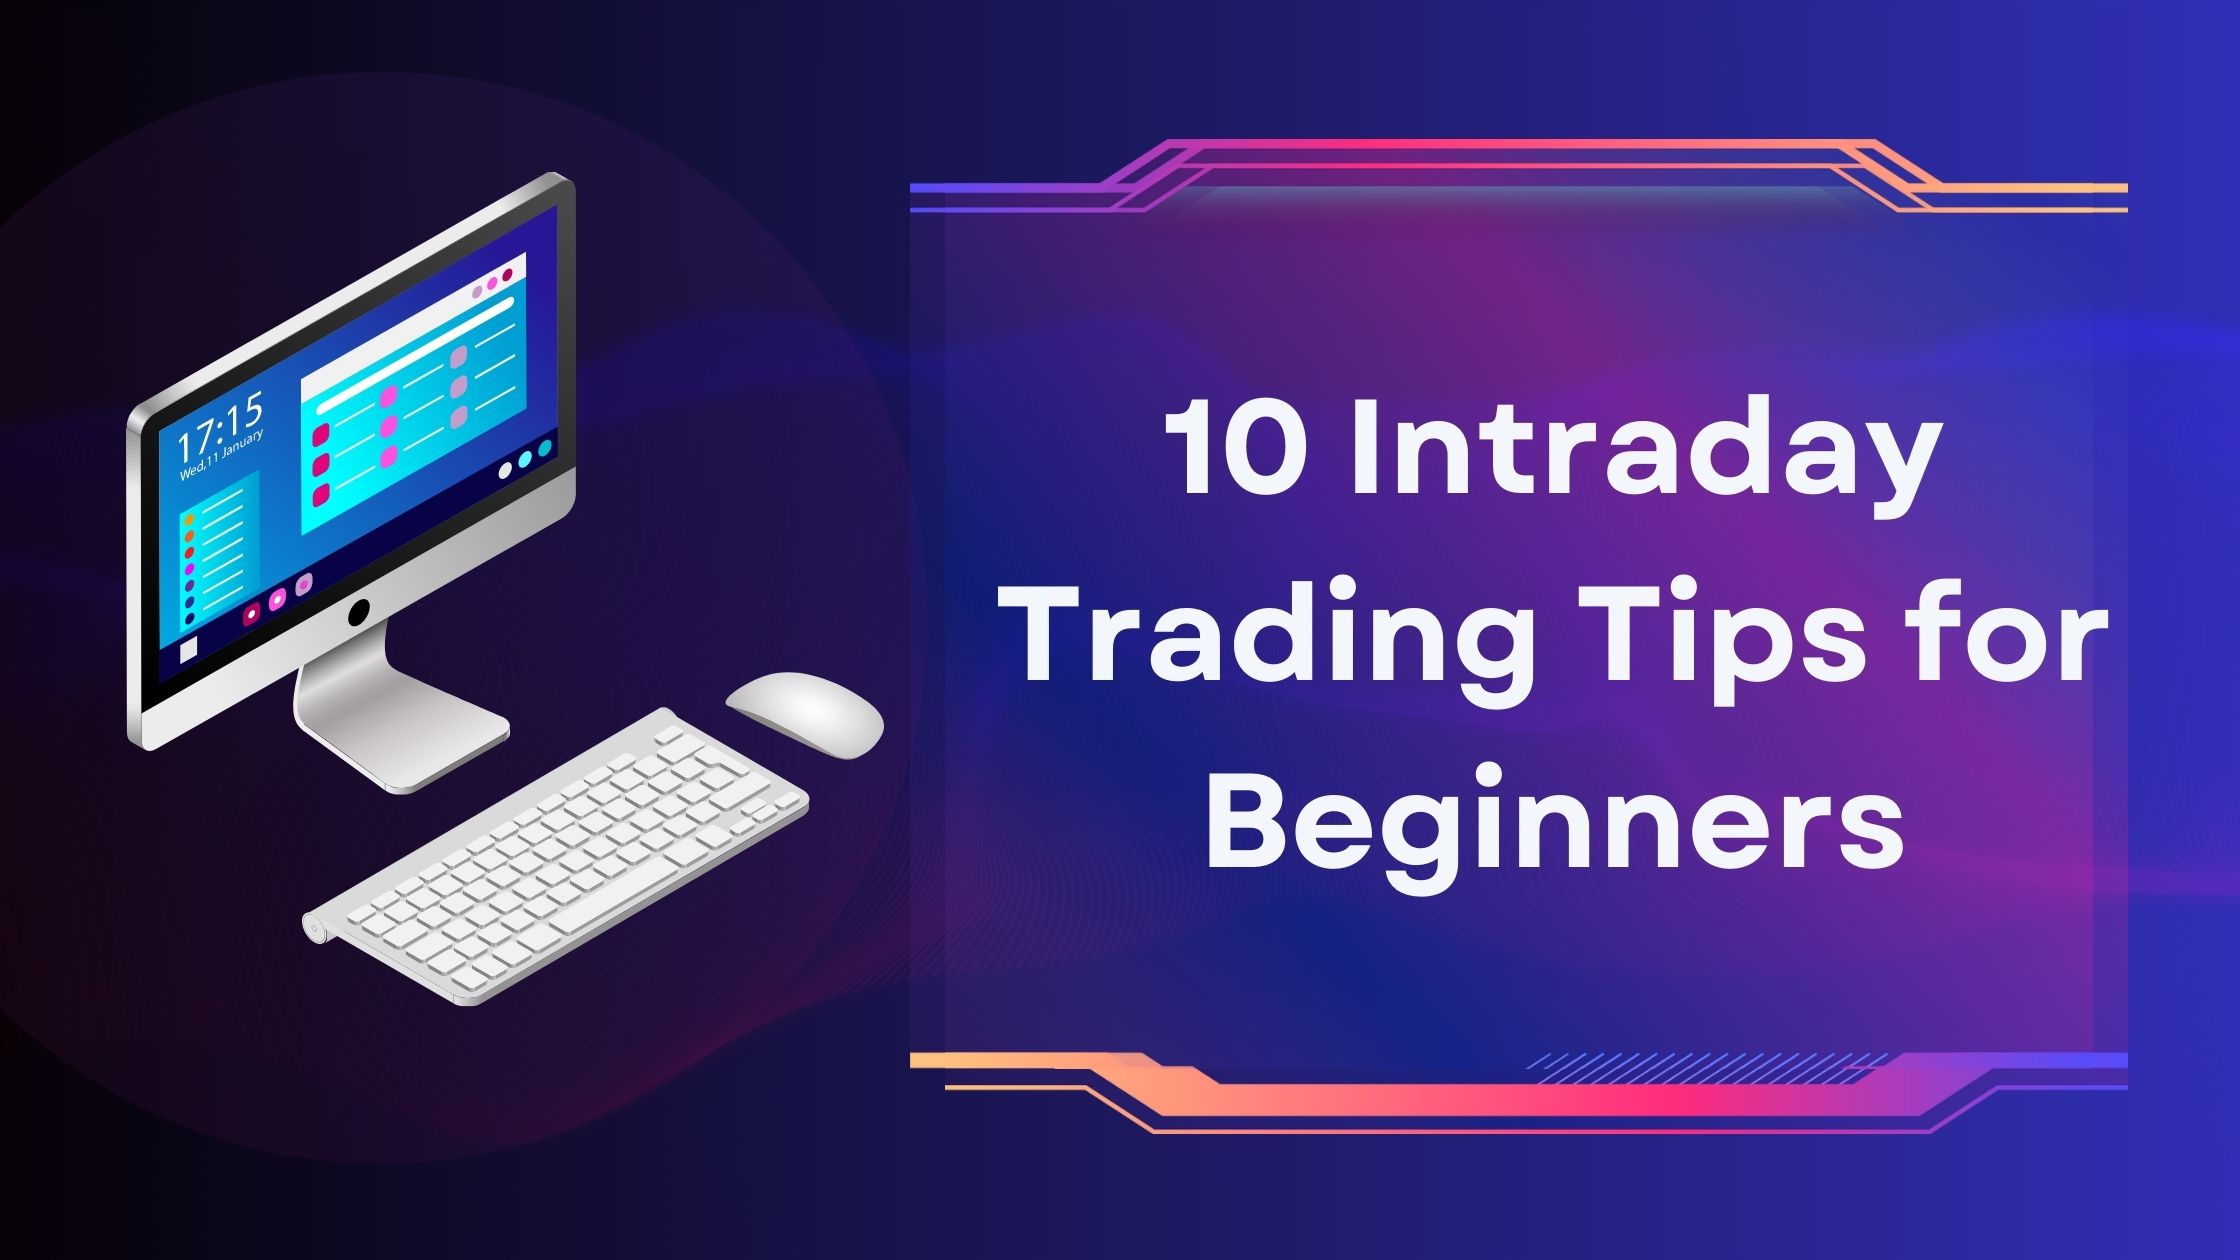 10 Intraday Trading Tips for Beginners